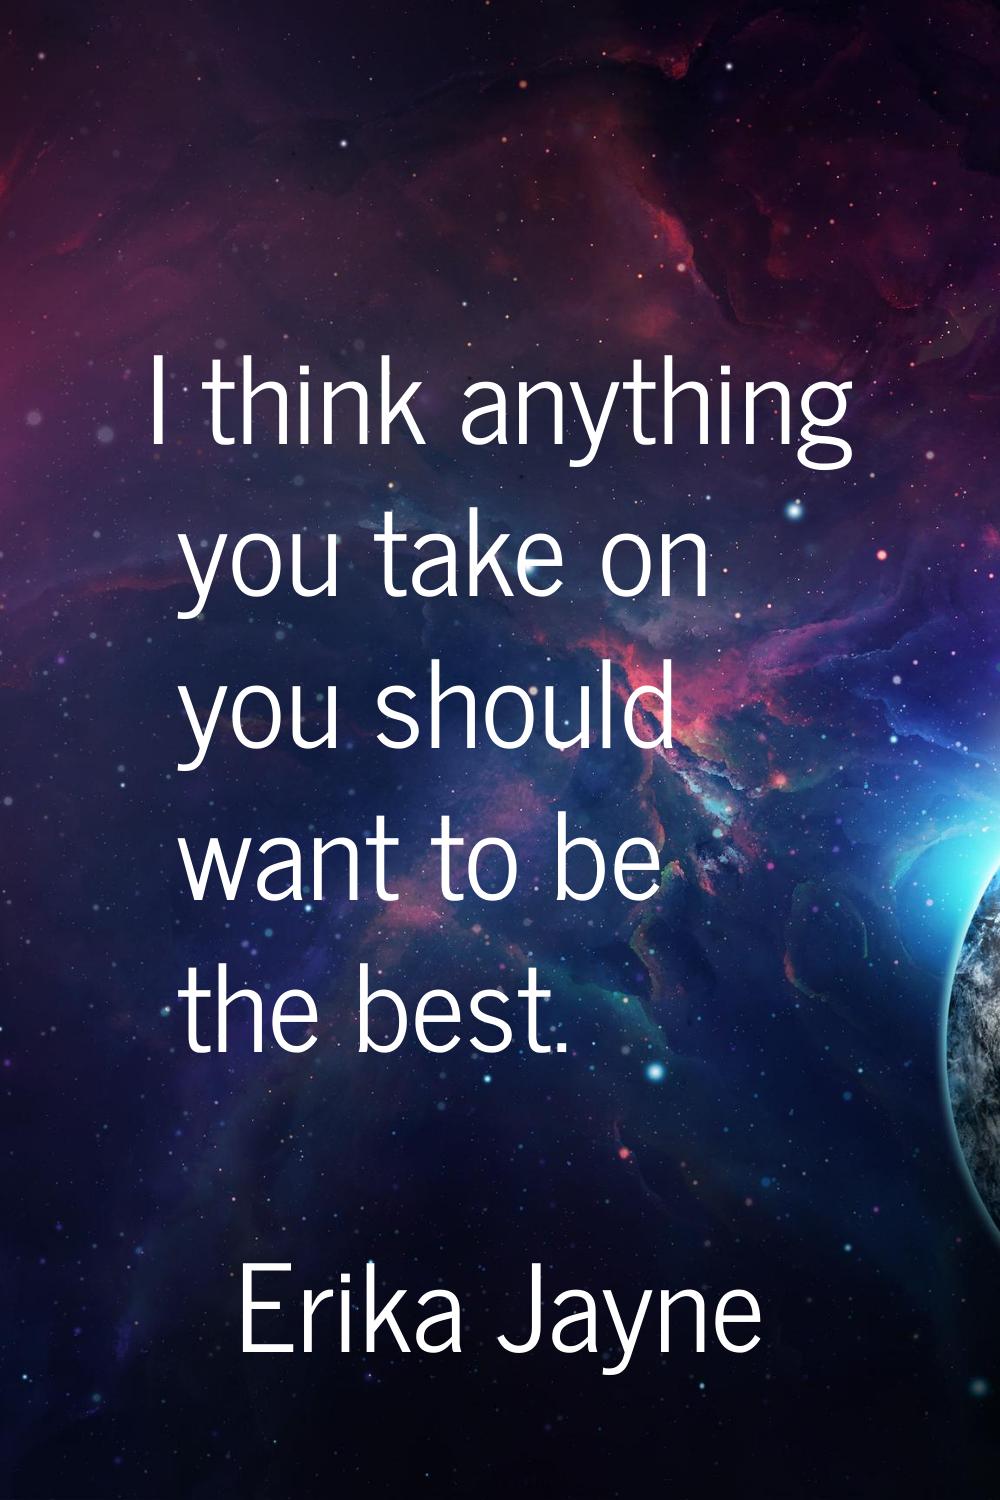 I think anything you take on you should want to be the best.